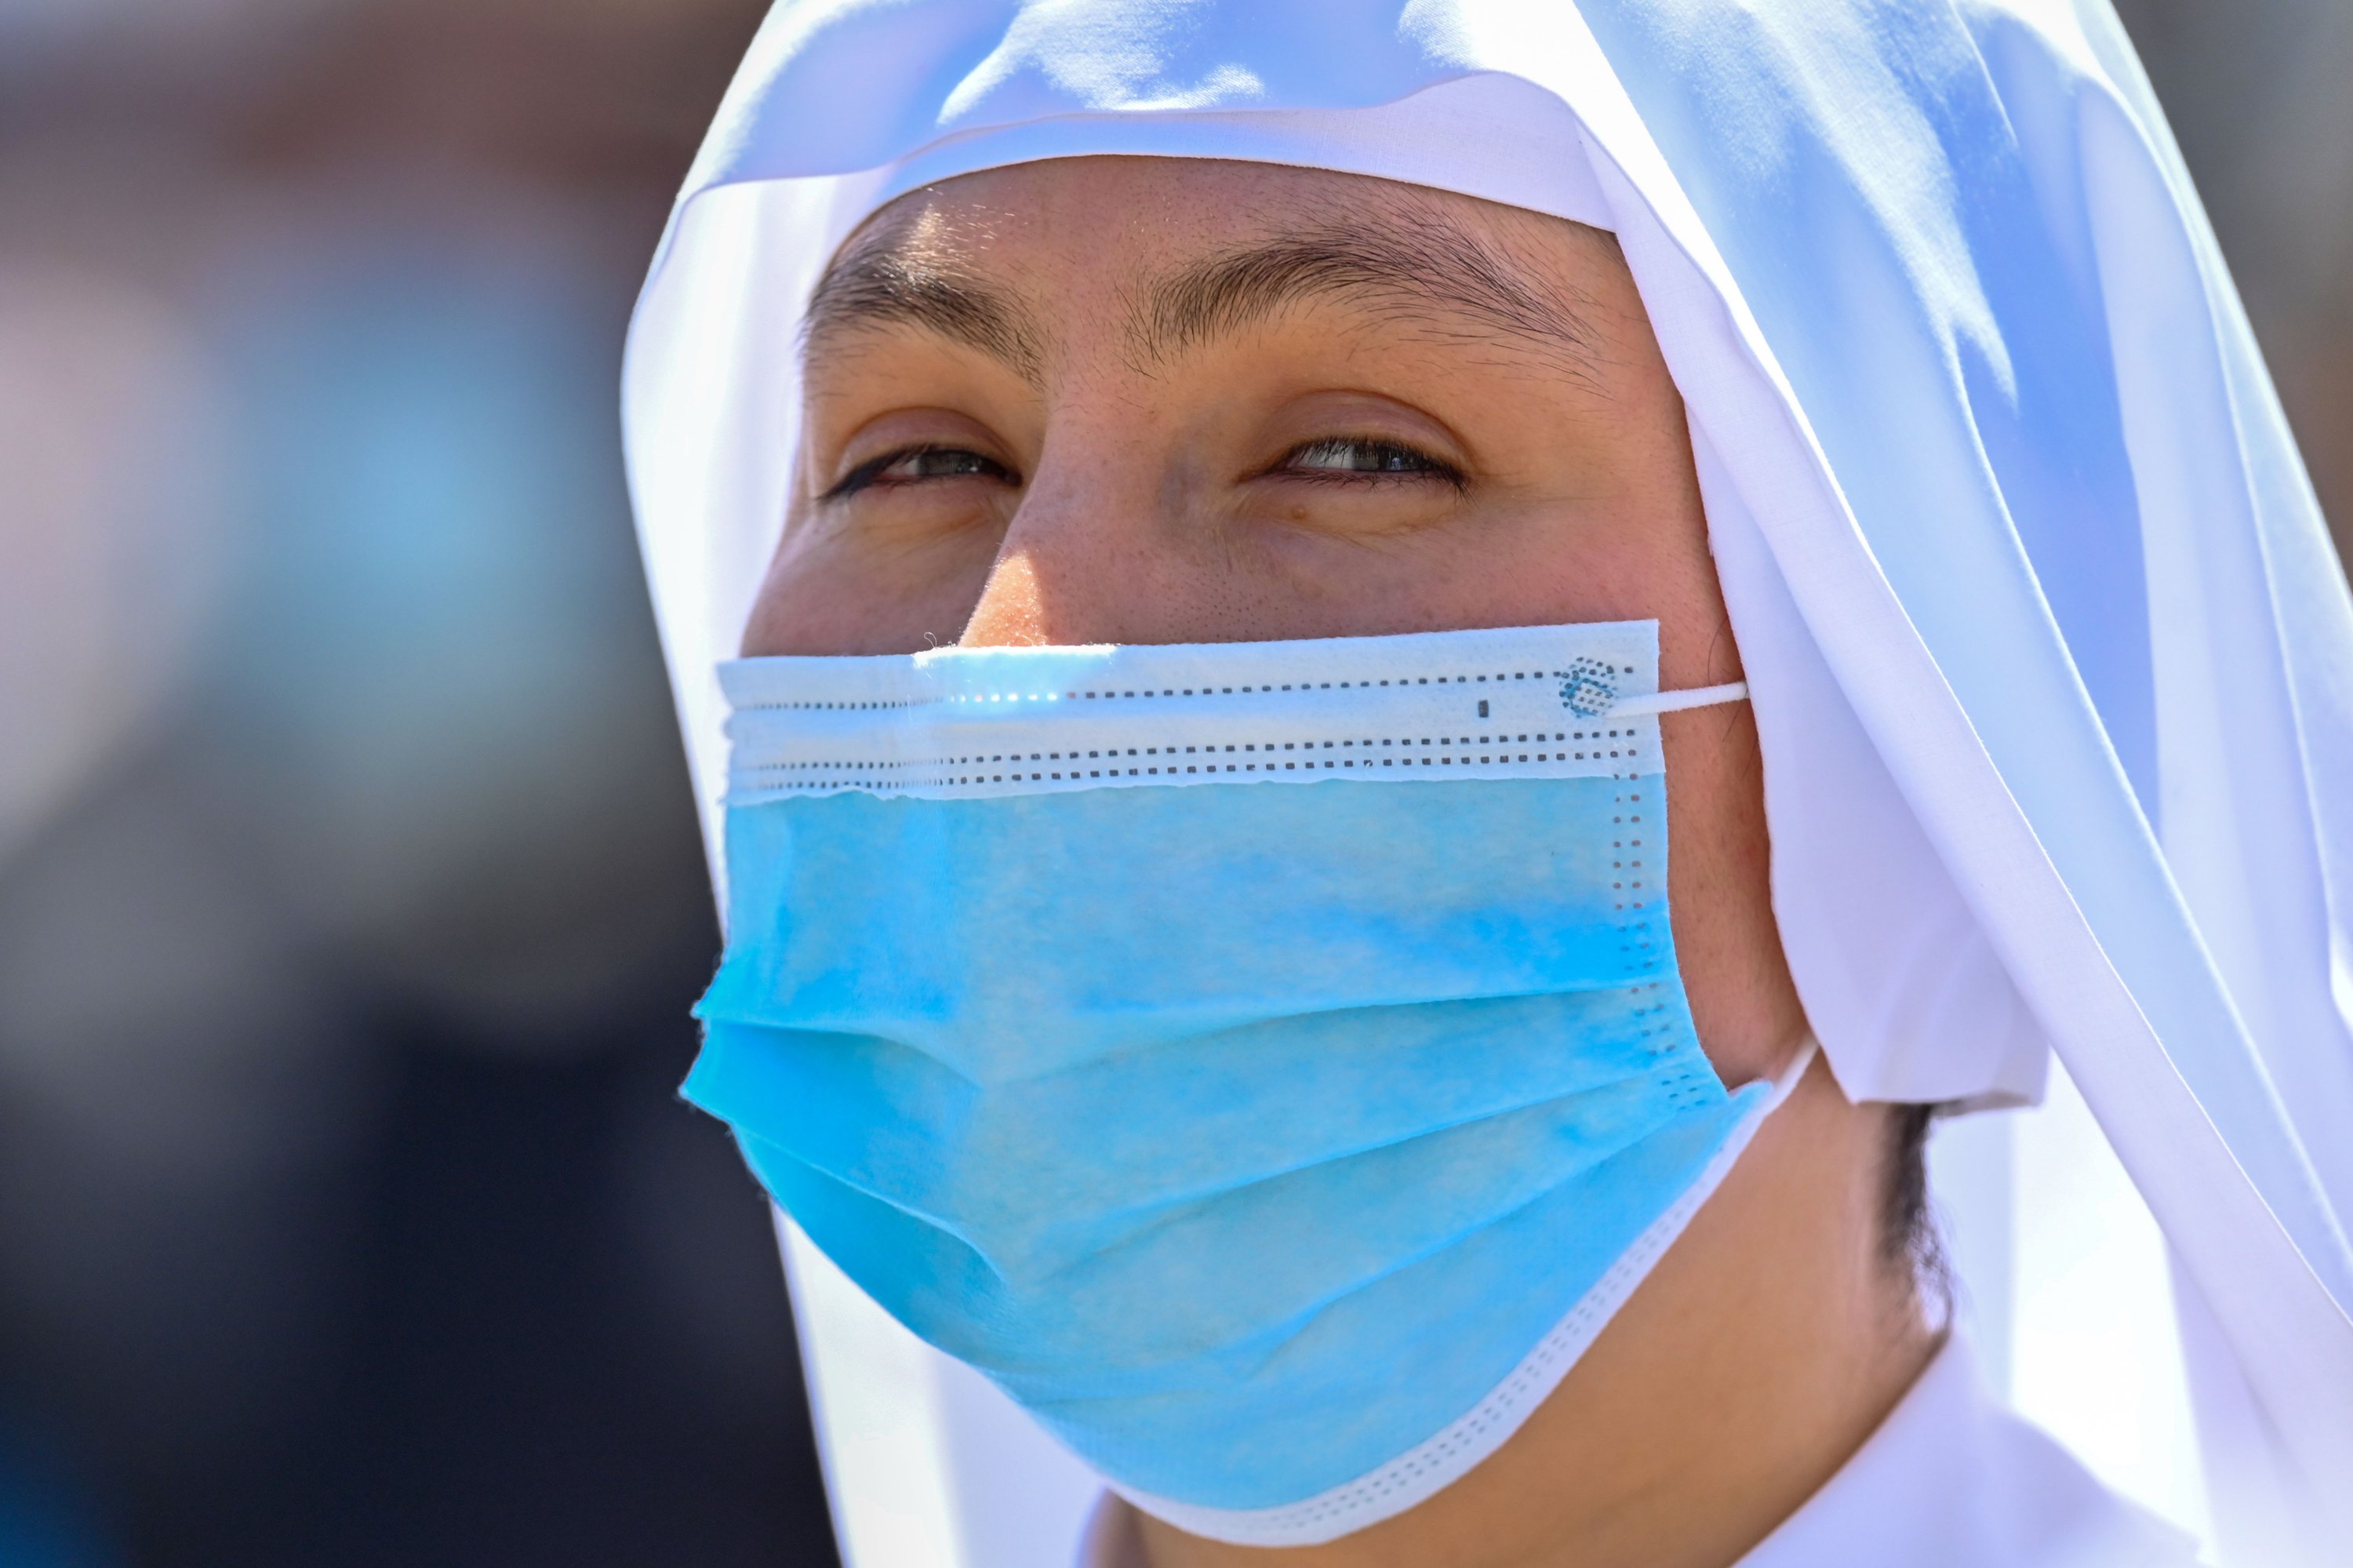 A nun wearing a face mask attends the pope's weekly Angelus prayer at St. Peter's Square in the Vatican, June 21, 2020. (AFP Photo)